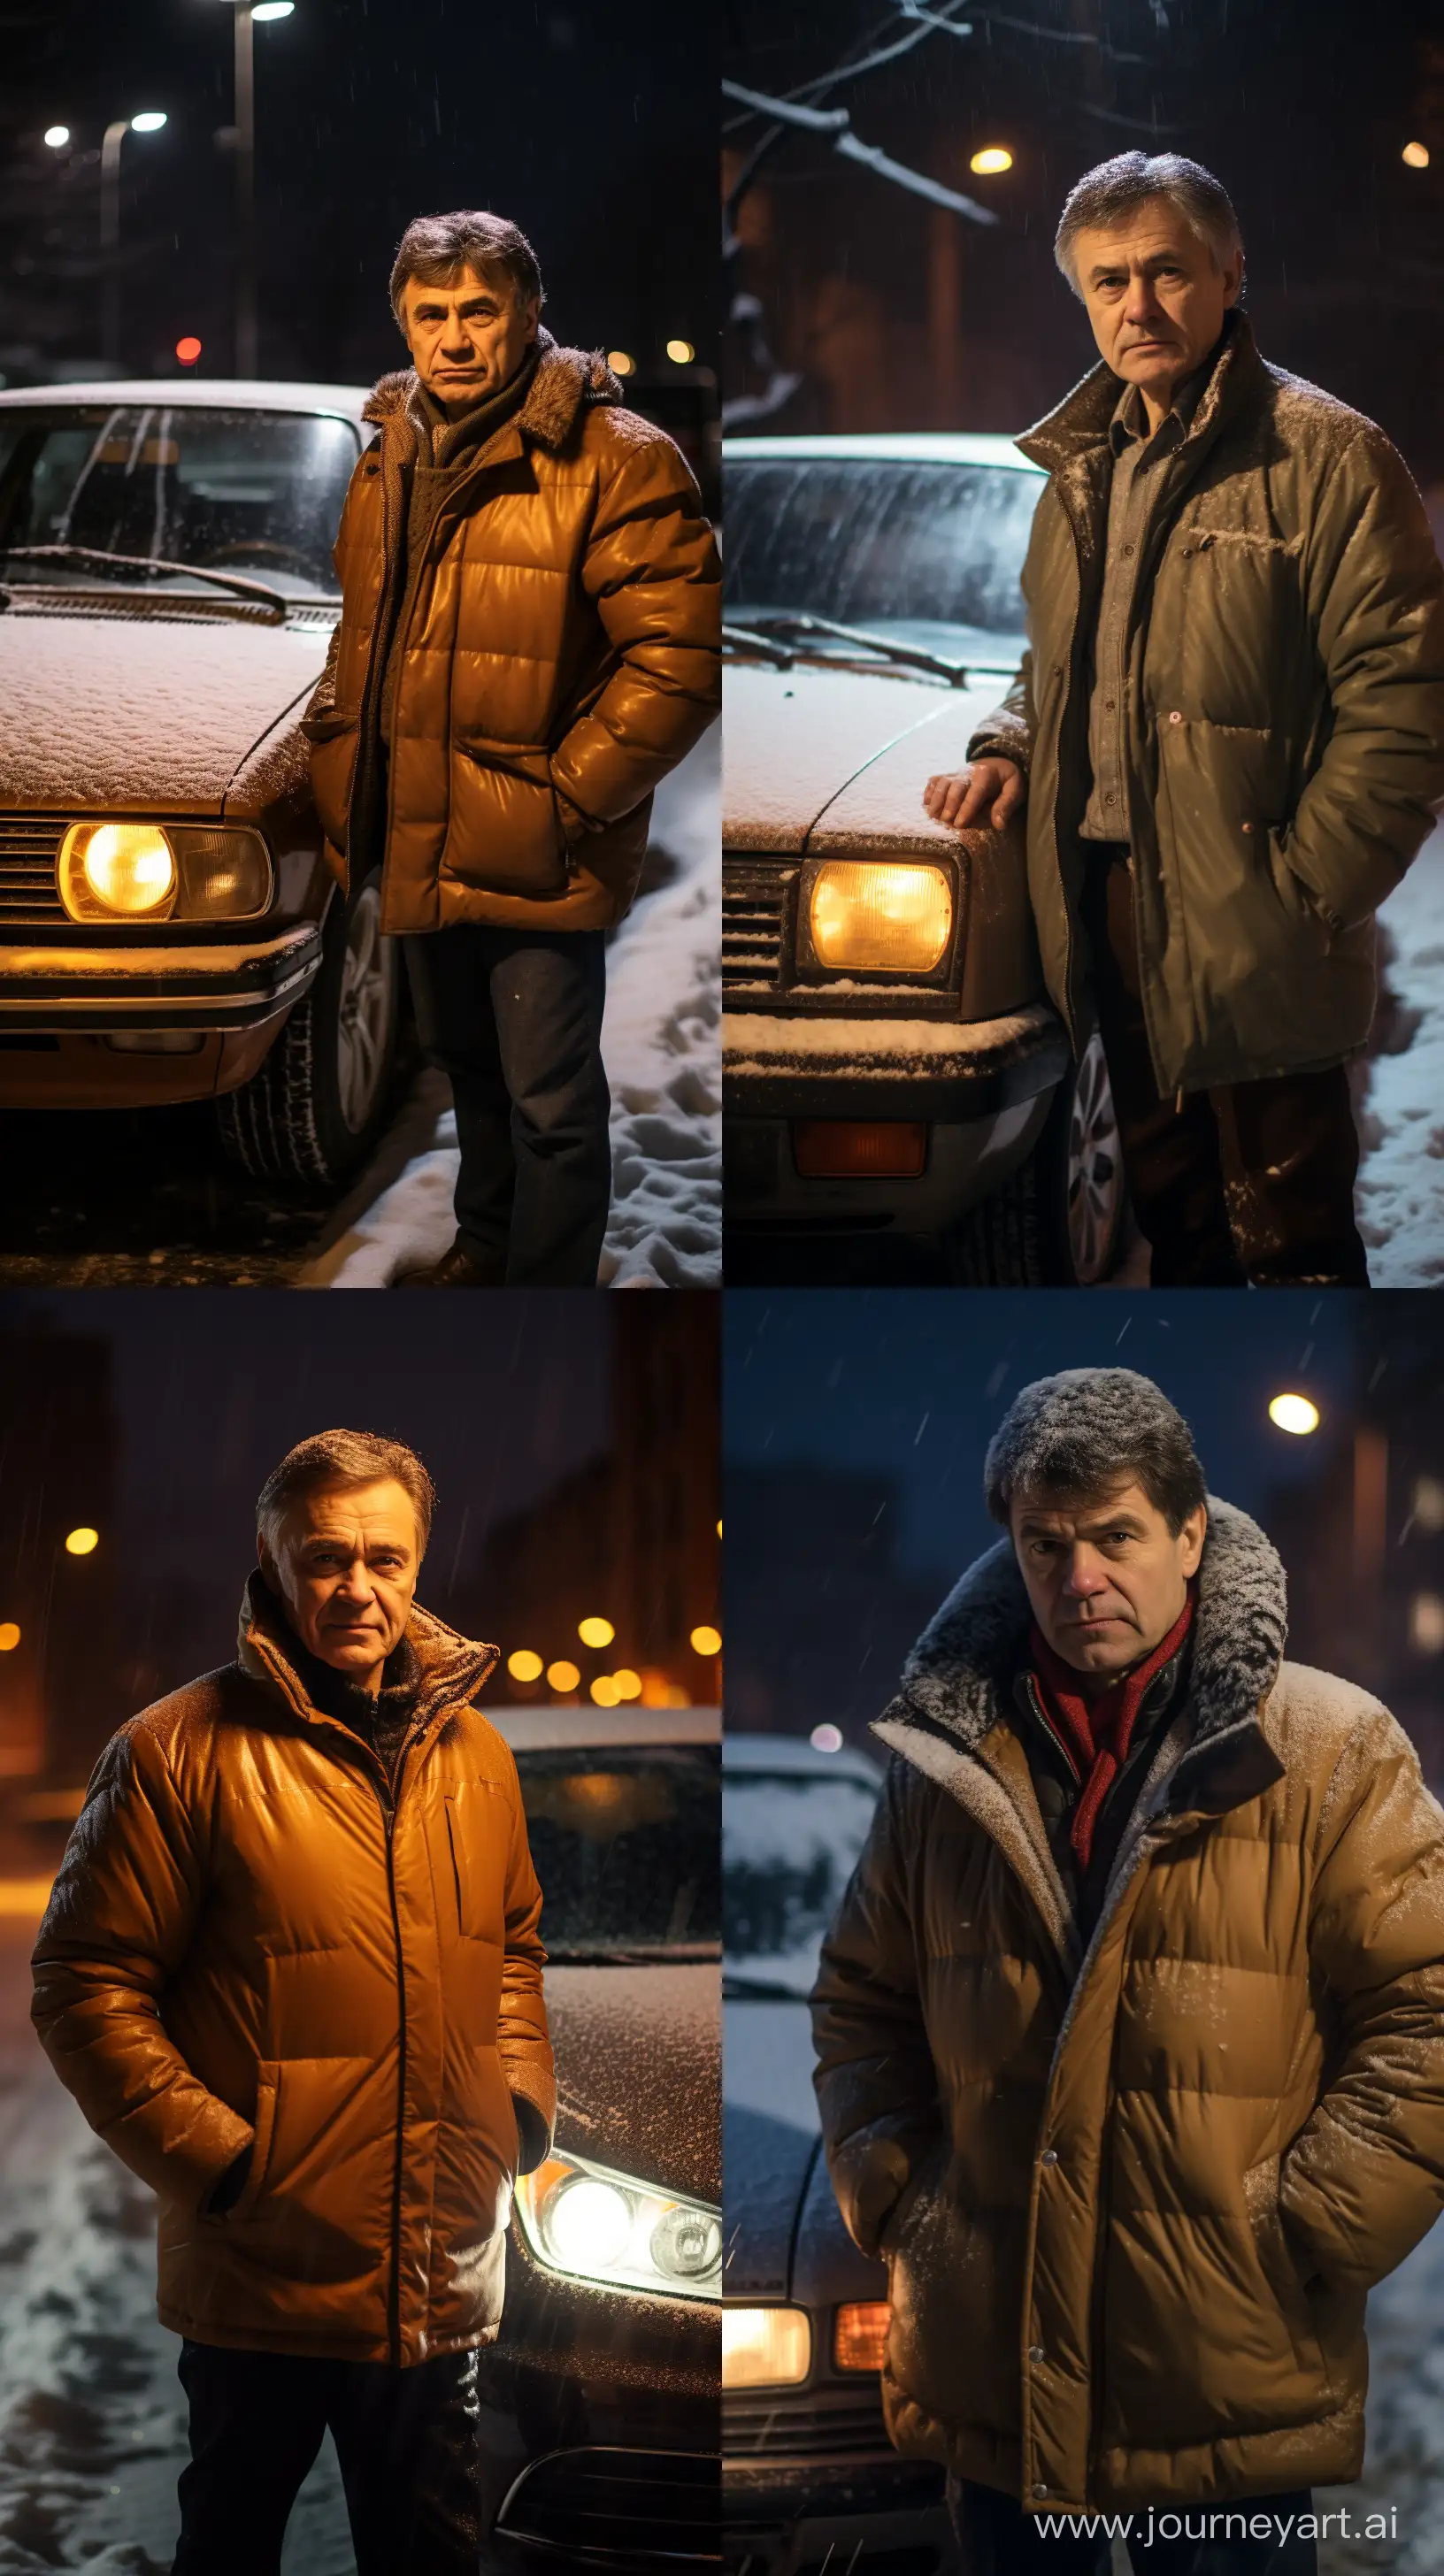 A man with brown hair, in the 80s and 90s of the USSR, stylishly dressed, standing next to a car, it's snowing in winter, the lights are on in the evening,man aged 60, Canon EOS 5D Mark IV DSLR, f/8 aperture, 1/125 second shutter speed, ISO 800, professional lighting setup, Adobe Photoshop, attention to detail::3 --ar 9:16